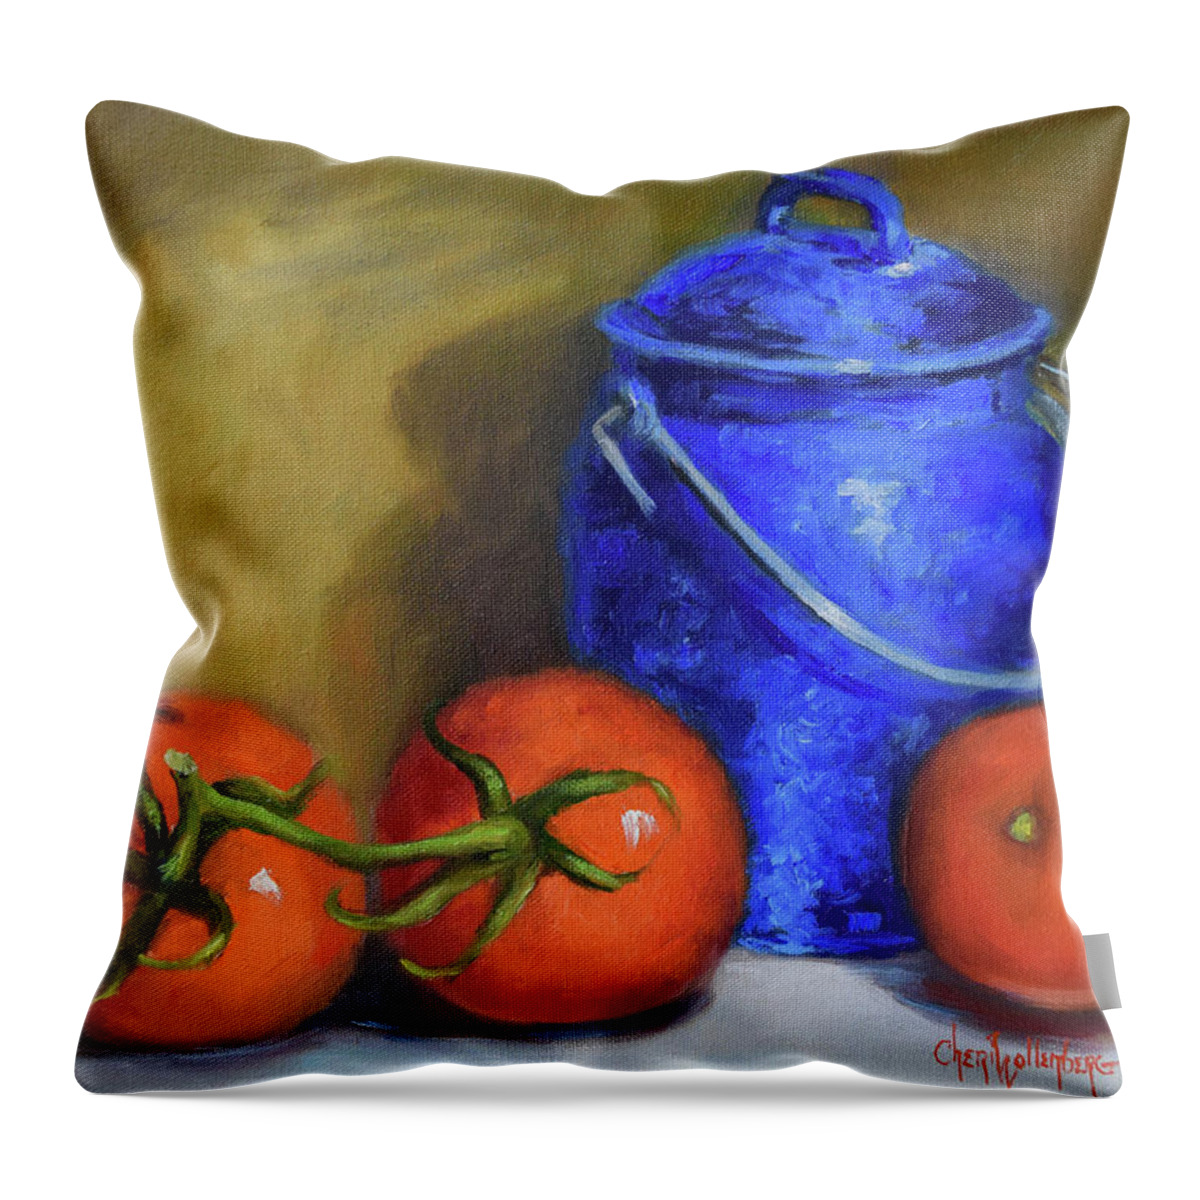 Blue Enamelware Throw Pillow featuring the painting Blue Enamelware Container And Bright Red Garden Tomatoes by Cheri Wollenberg